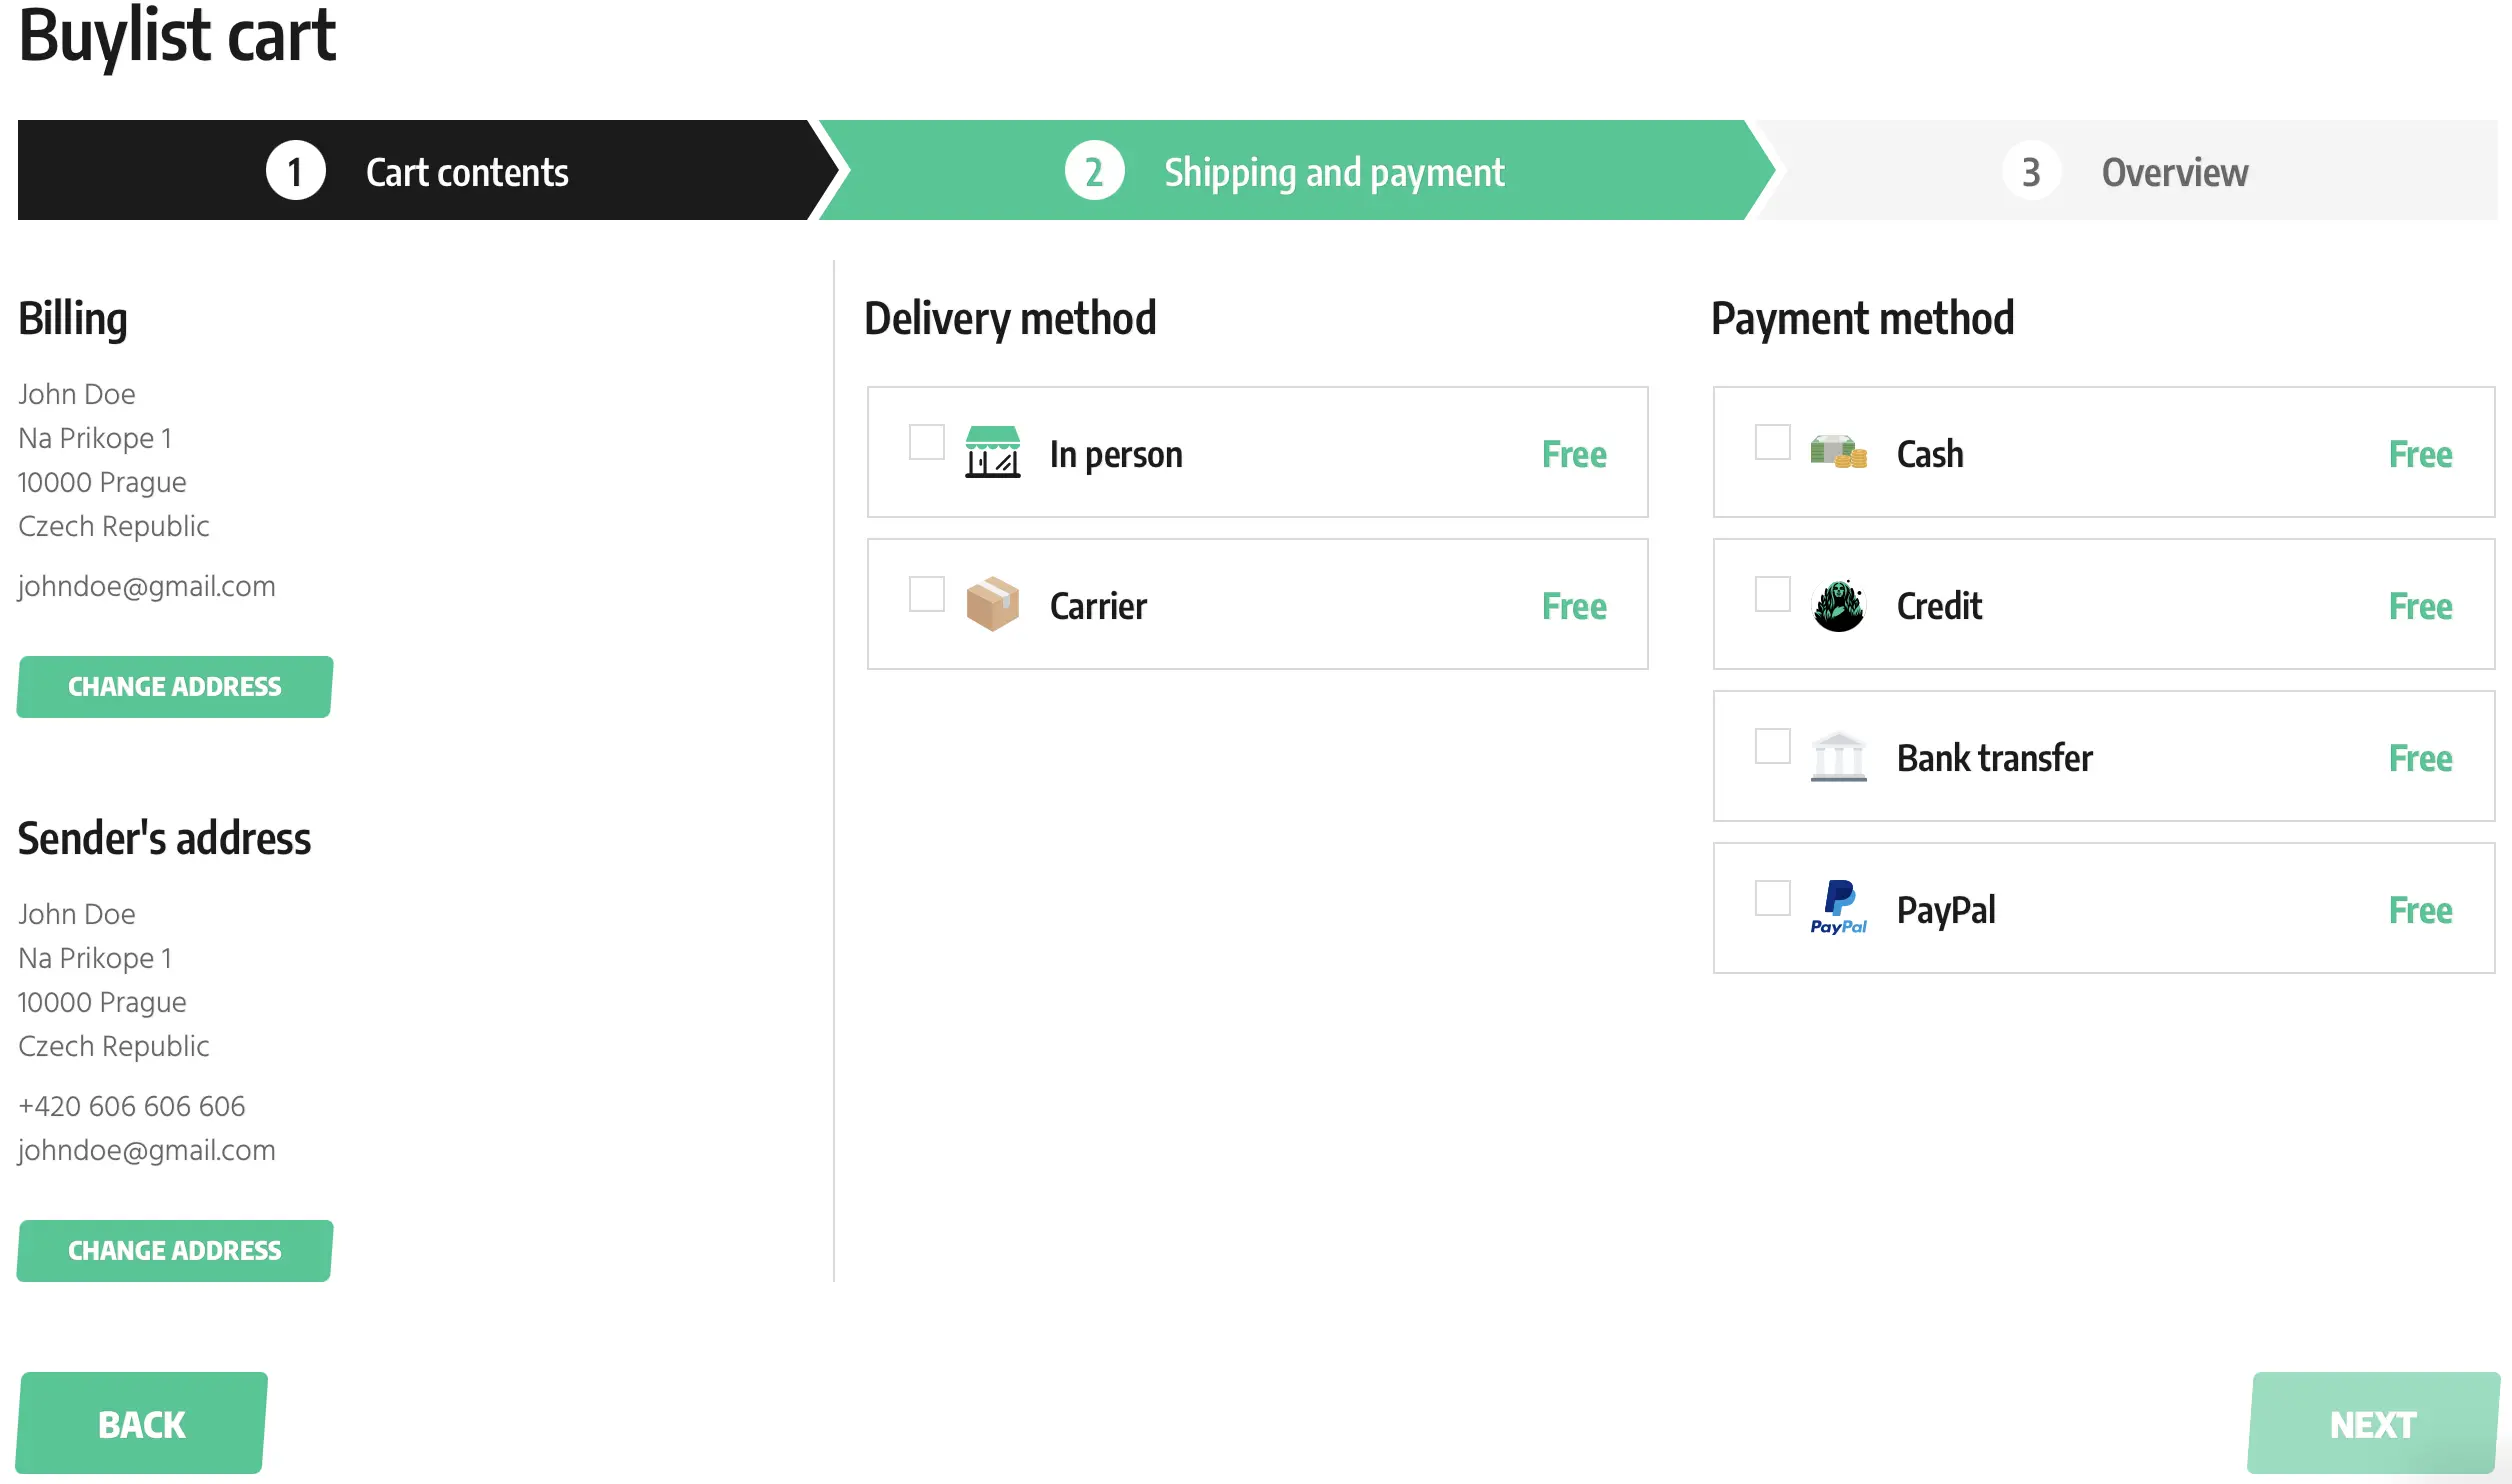 Choose delivery and payment method